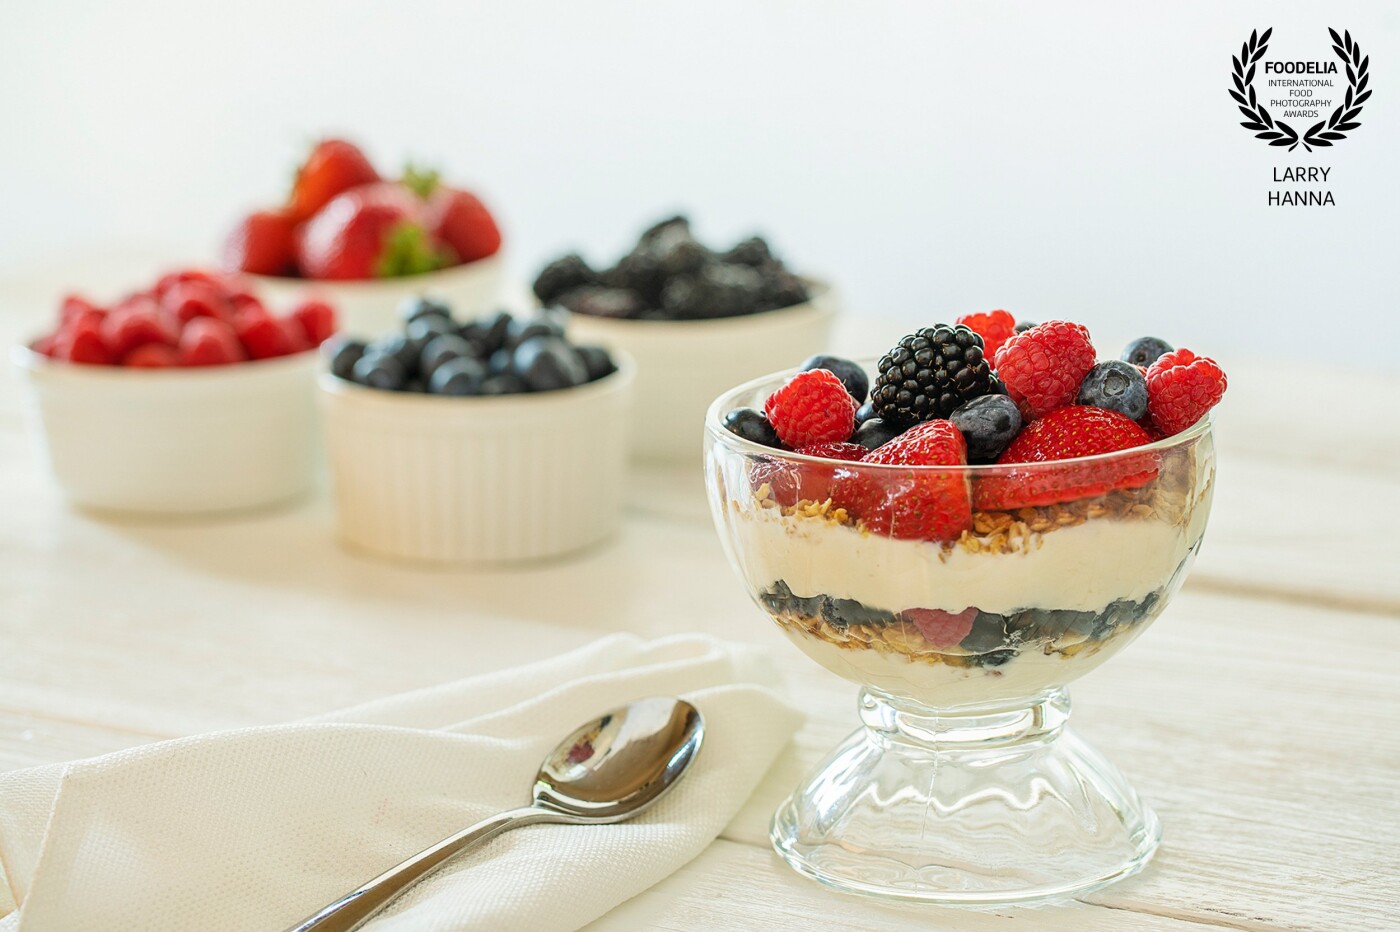 I love the early mornings with the light streaming through my kitchen window.  My family loves a fresh berry parfait during the summer.  I createdd this fresh berry parfait with Greek yogurt and granola and photographed it in my kitchen with window light.